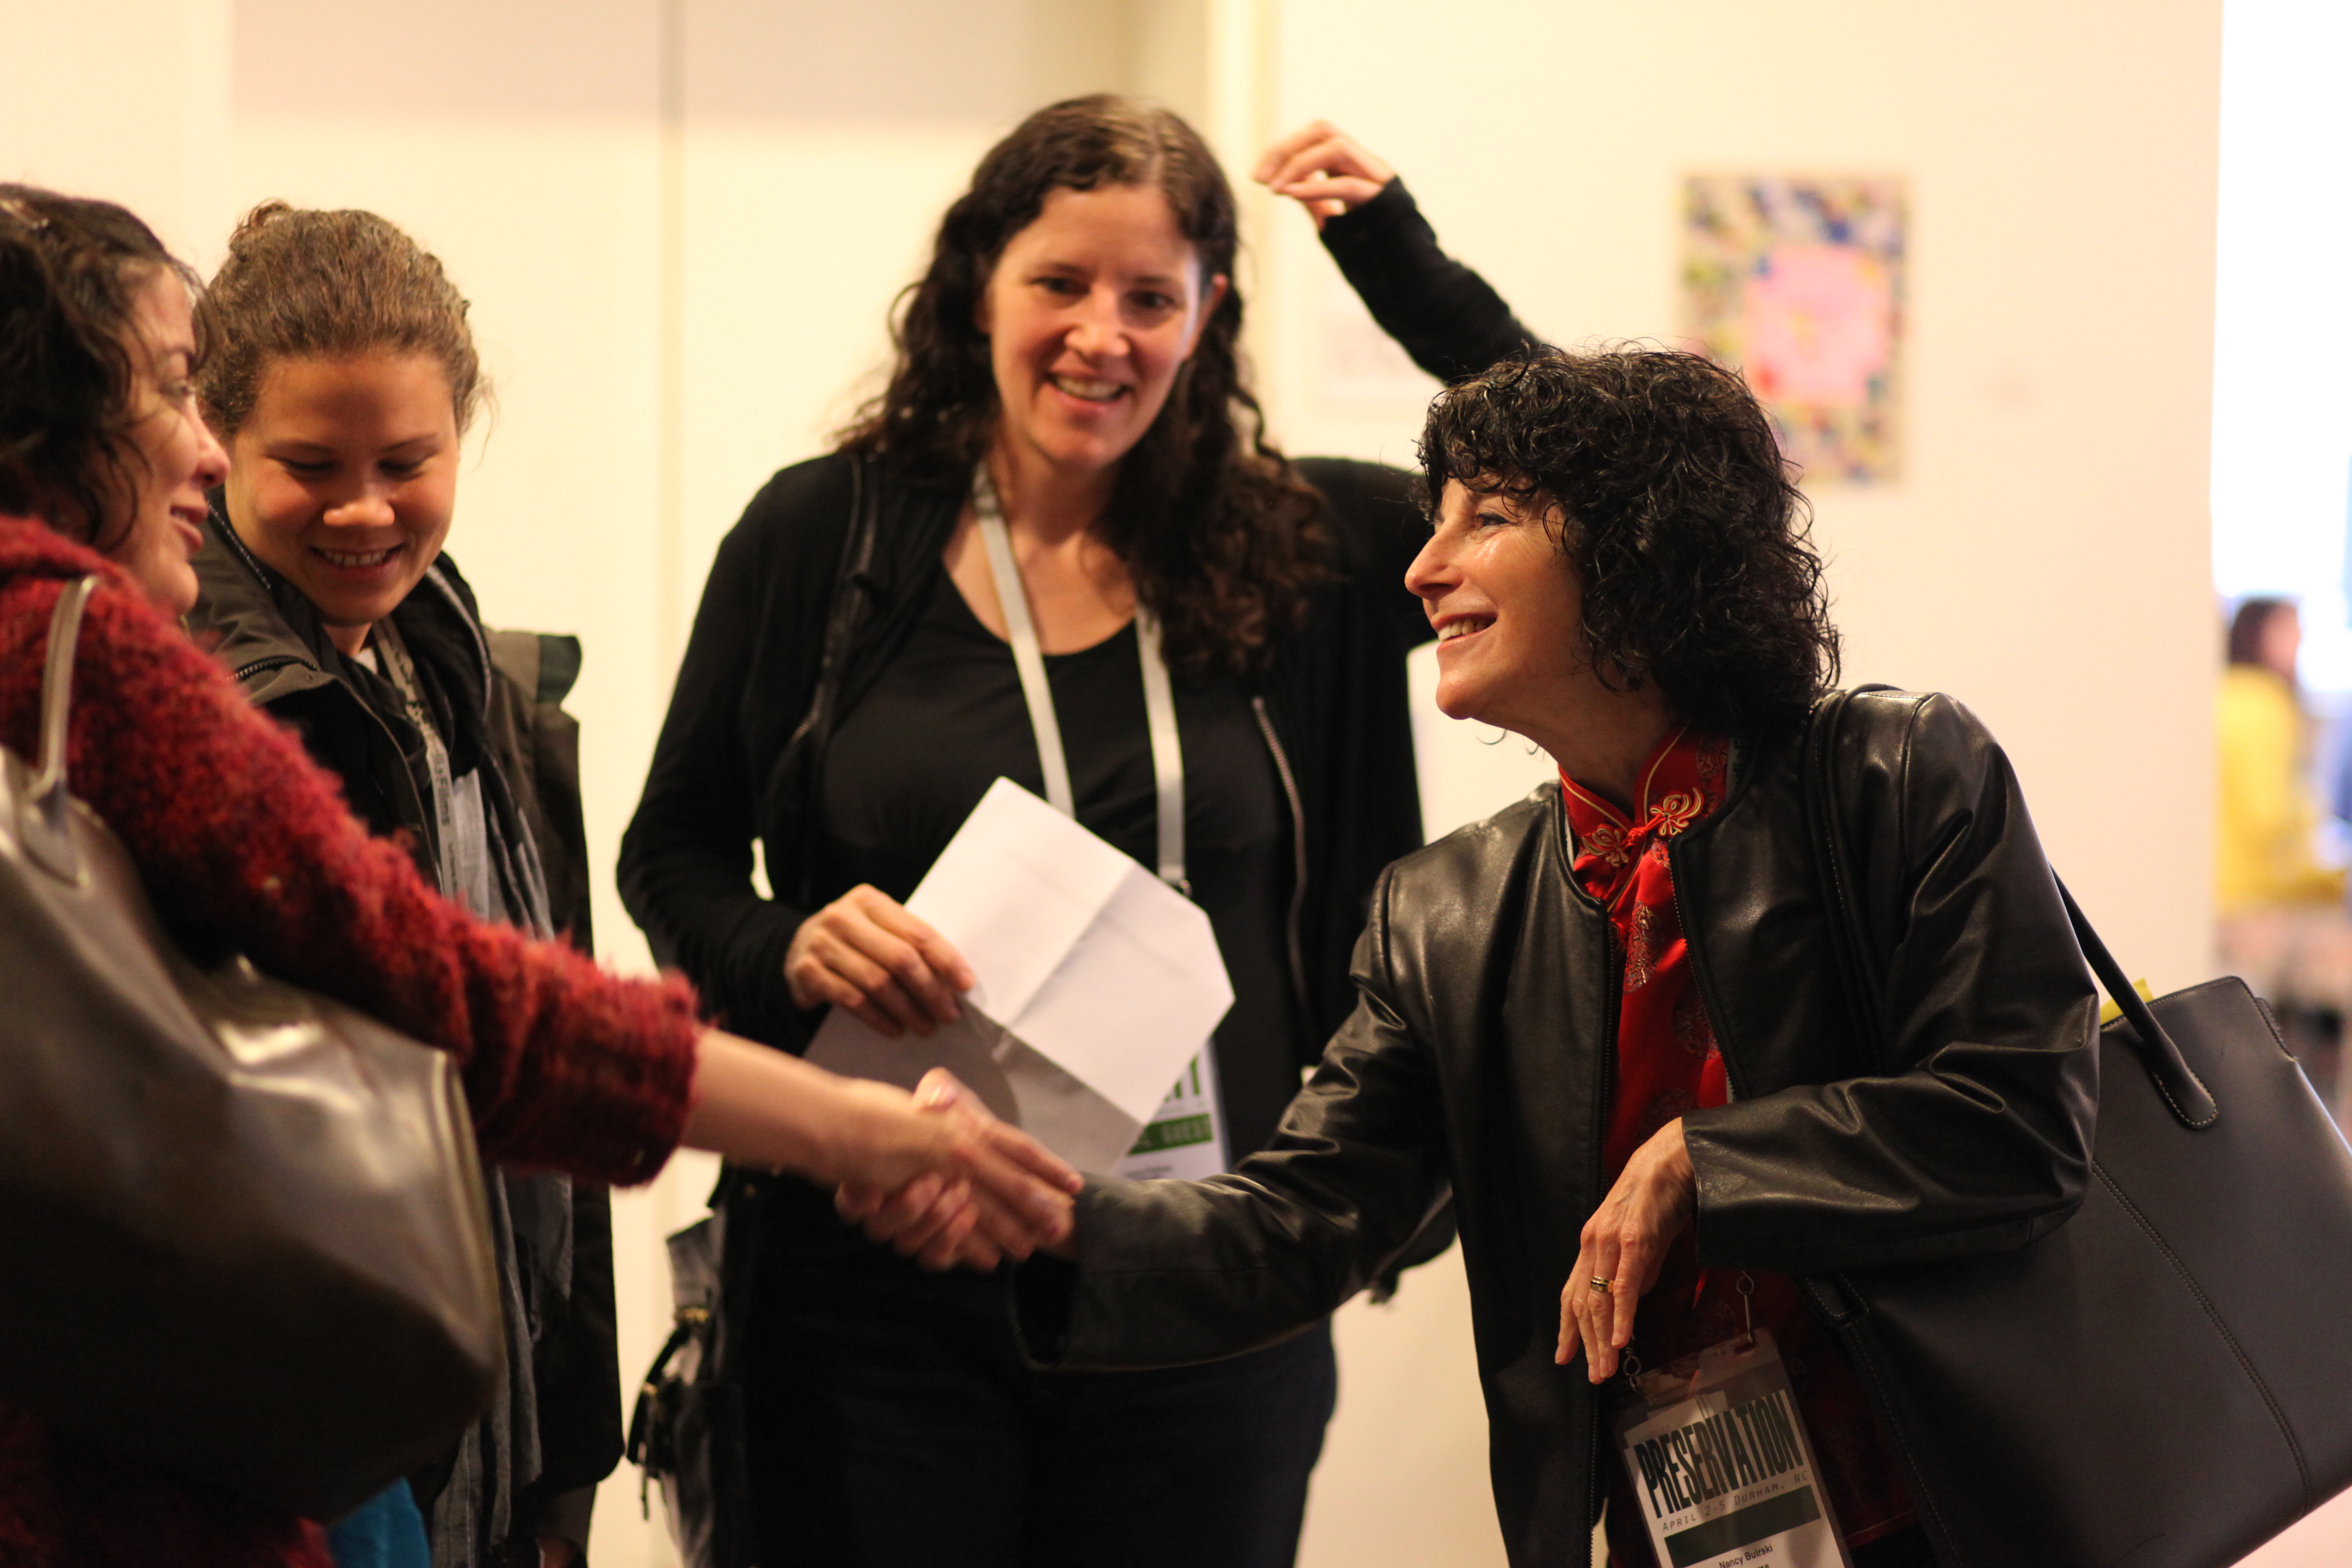 Photograph of Nancy Buirski greeting festival guests, with Laura Poirtras looking on, at Full Frame in 2009. Photo credit: Steve Bognar